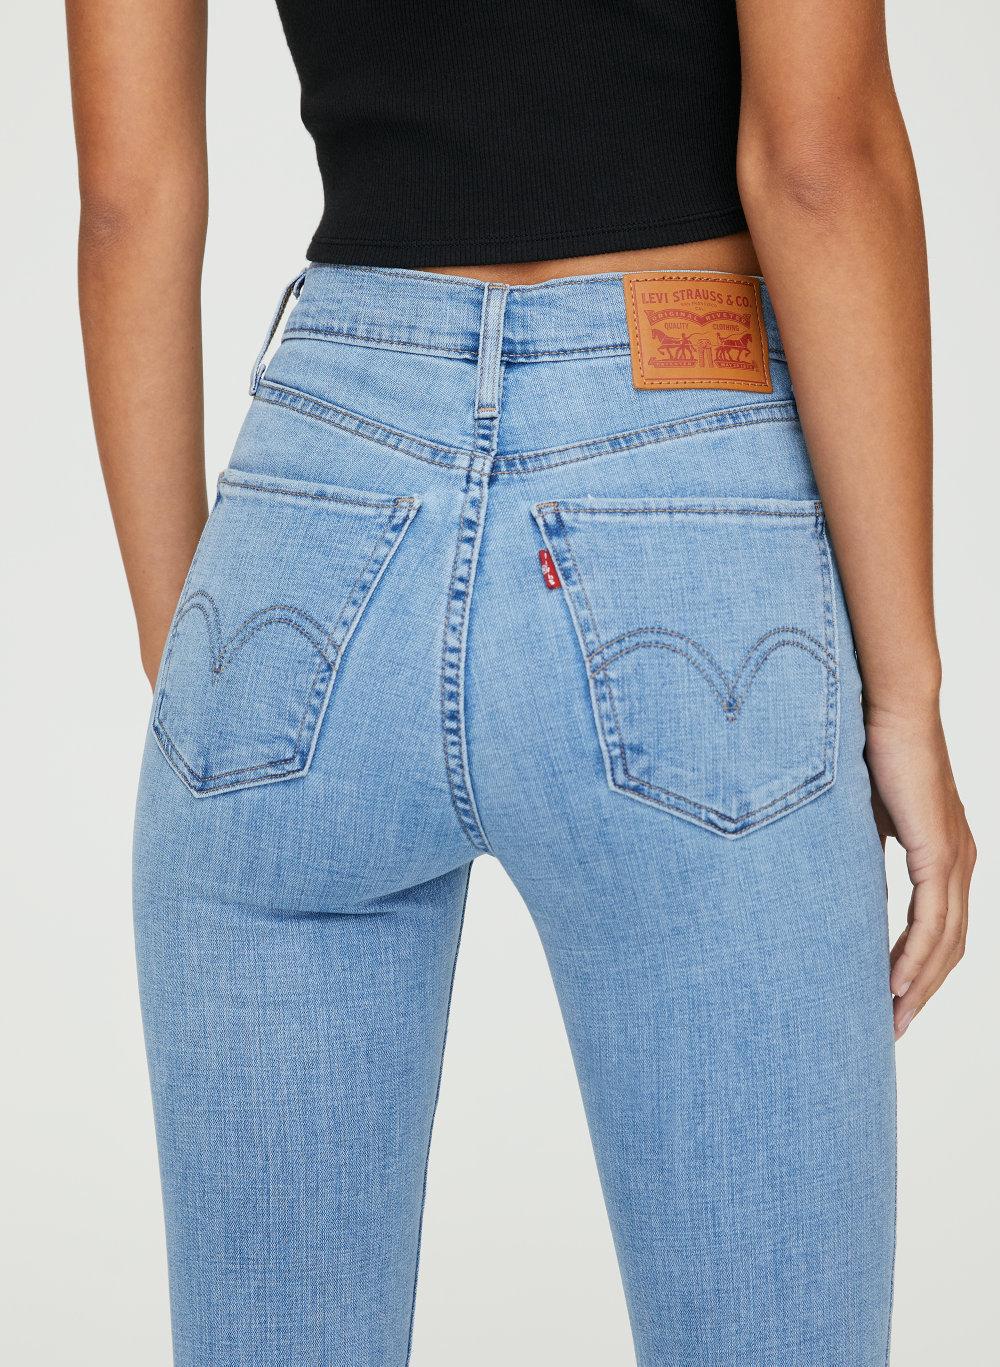 best levis high waisted jeans